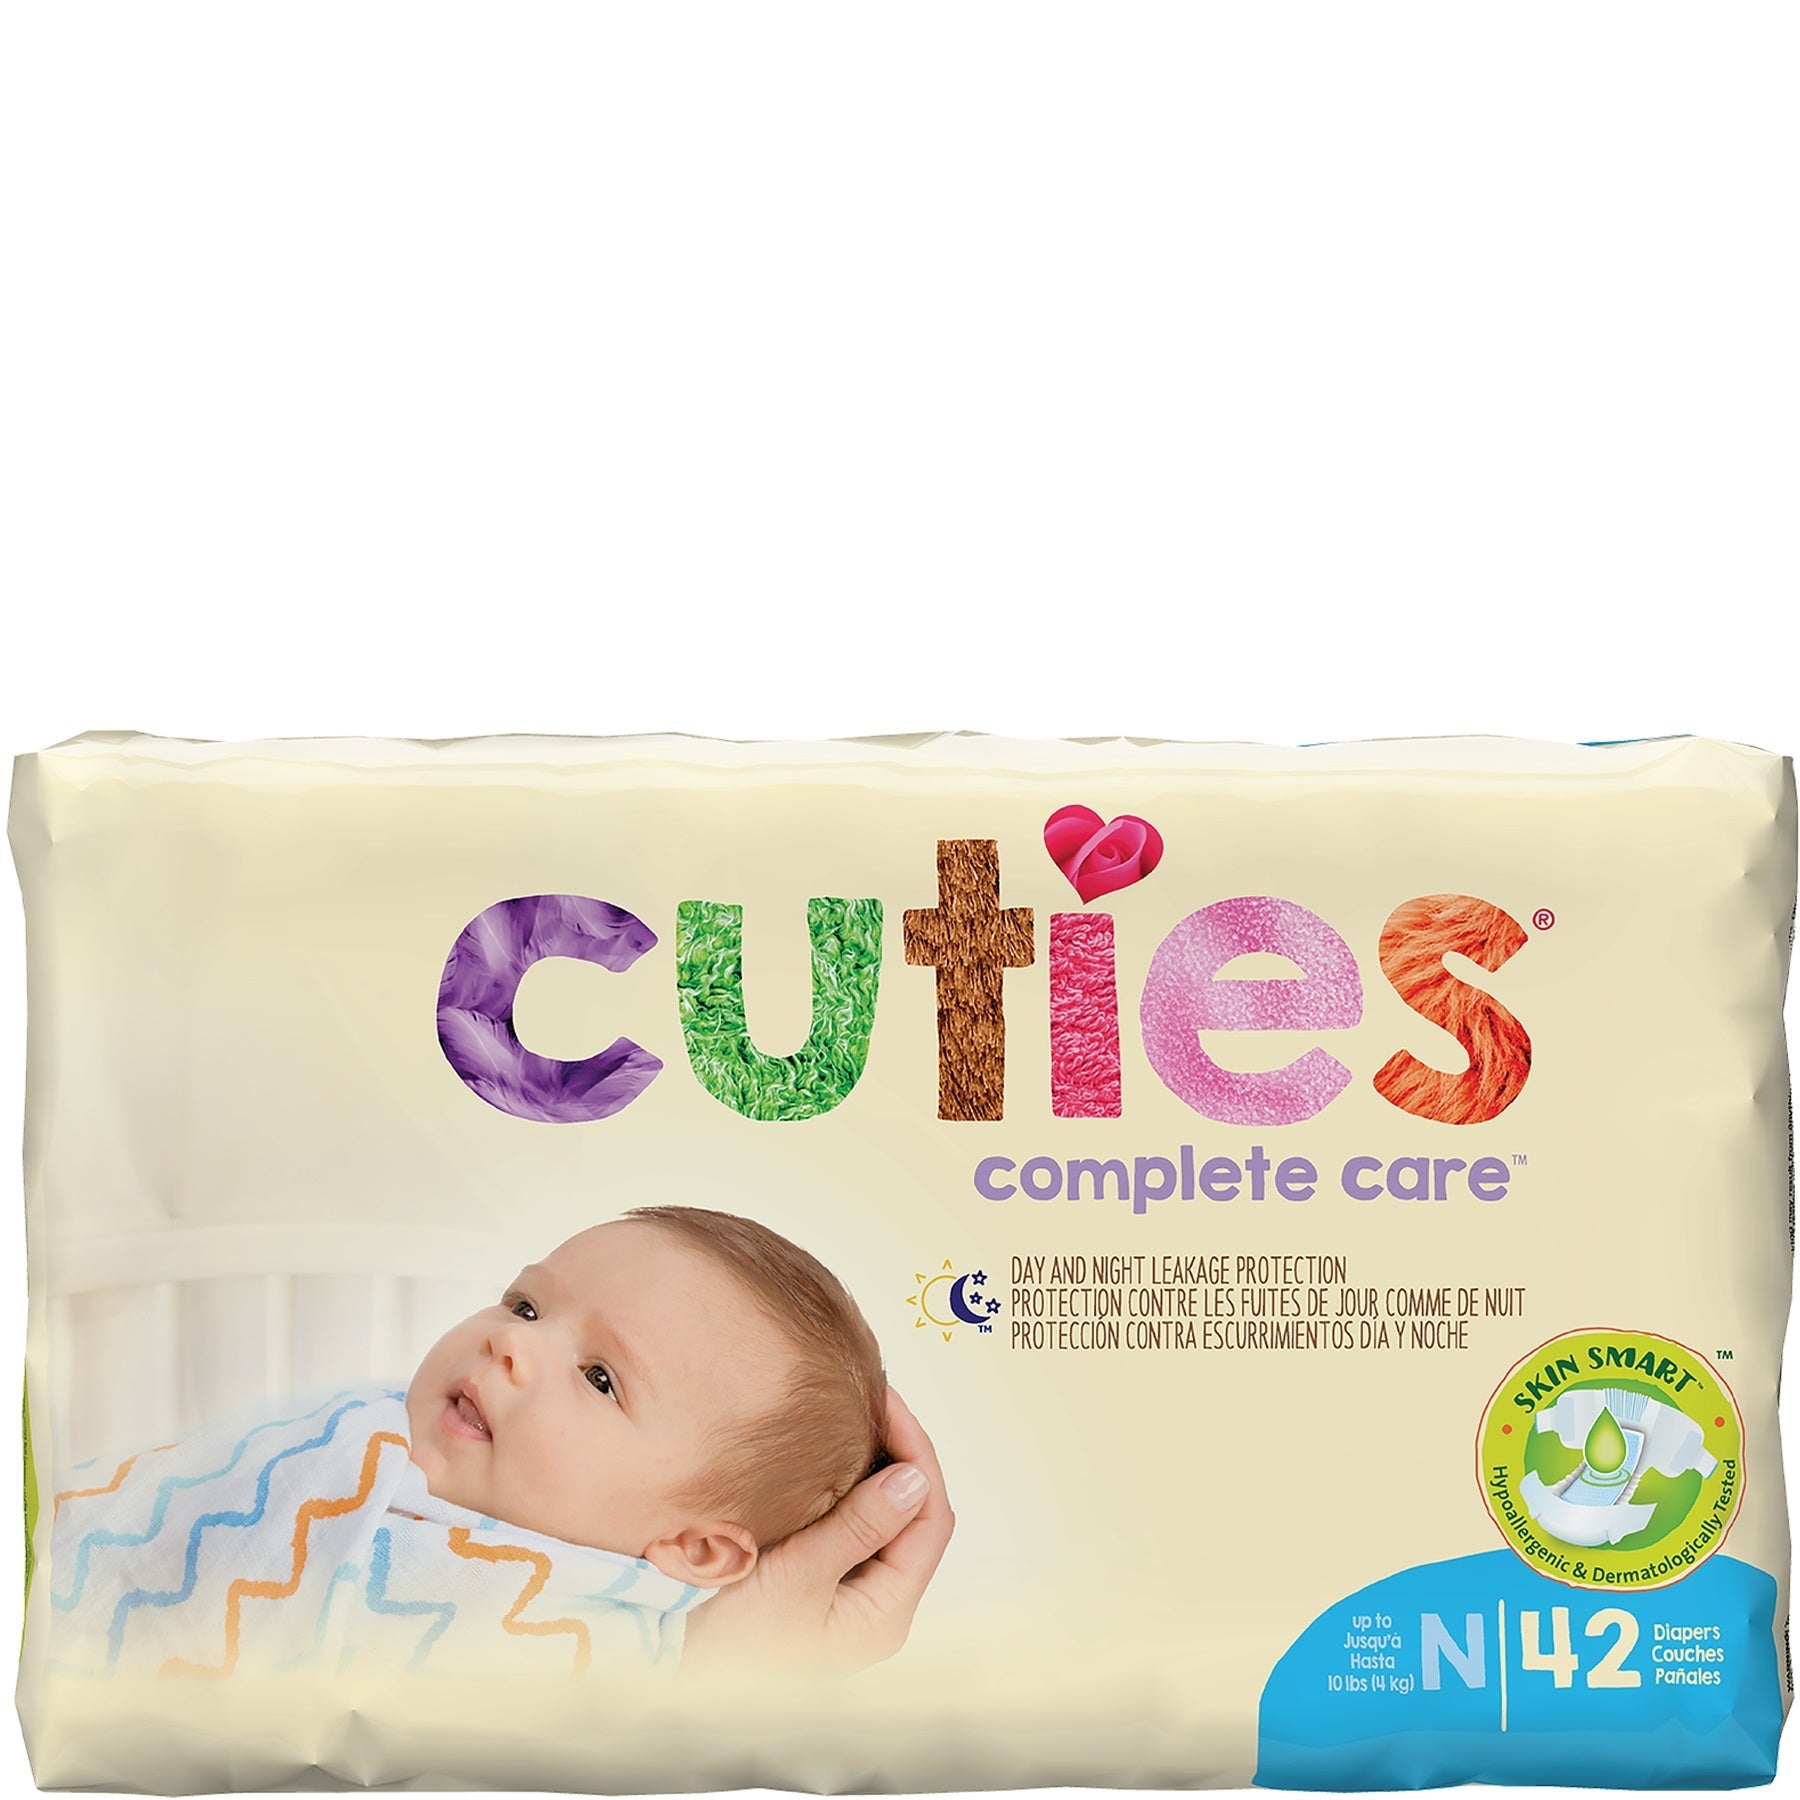 PK/42 - Cuties® Baby Diaper Size Newborn, Up to 10 lb - Replaces: FQCCC00 - Best Buy Medical Supplies